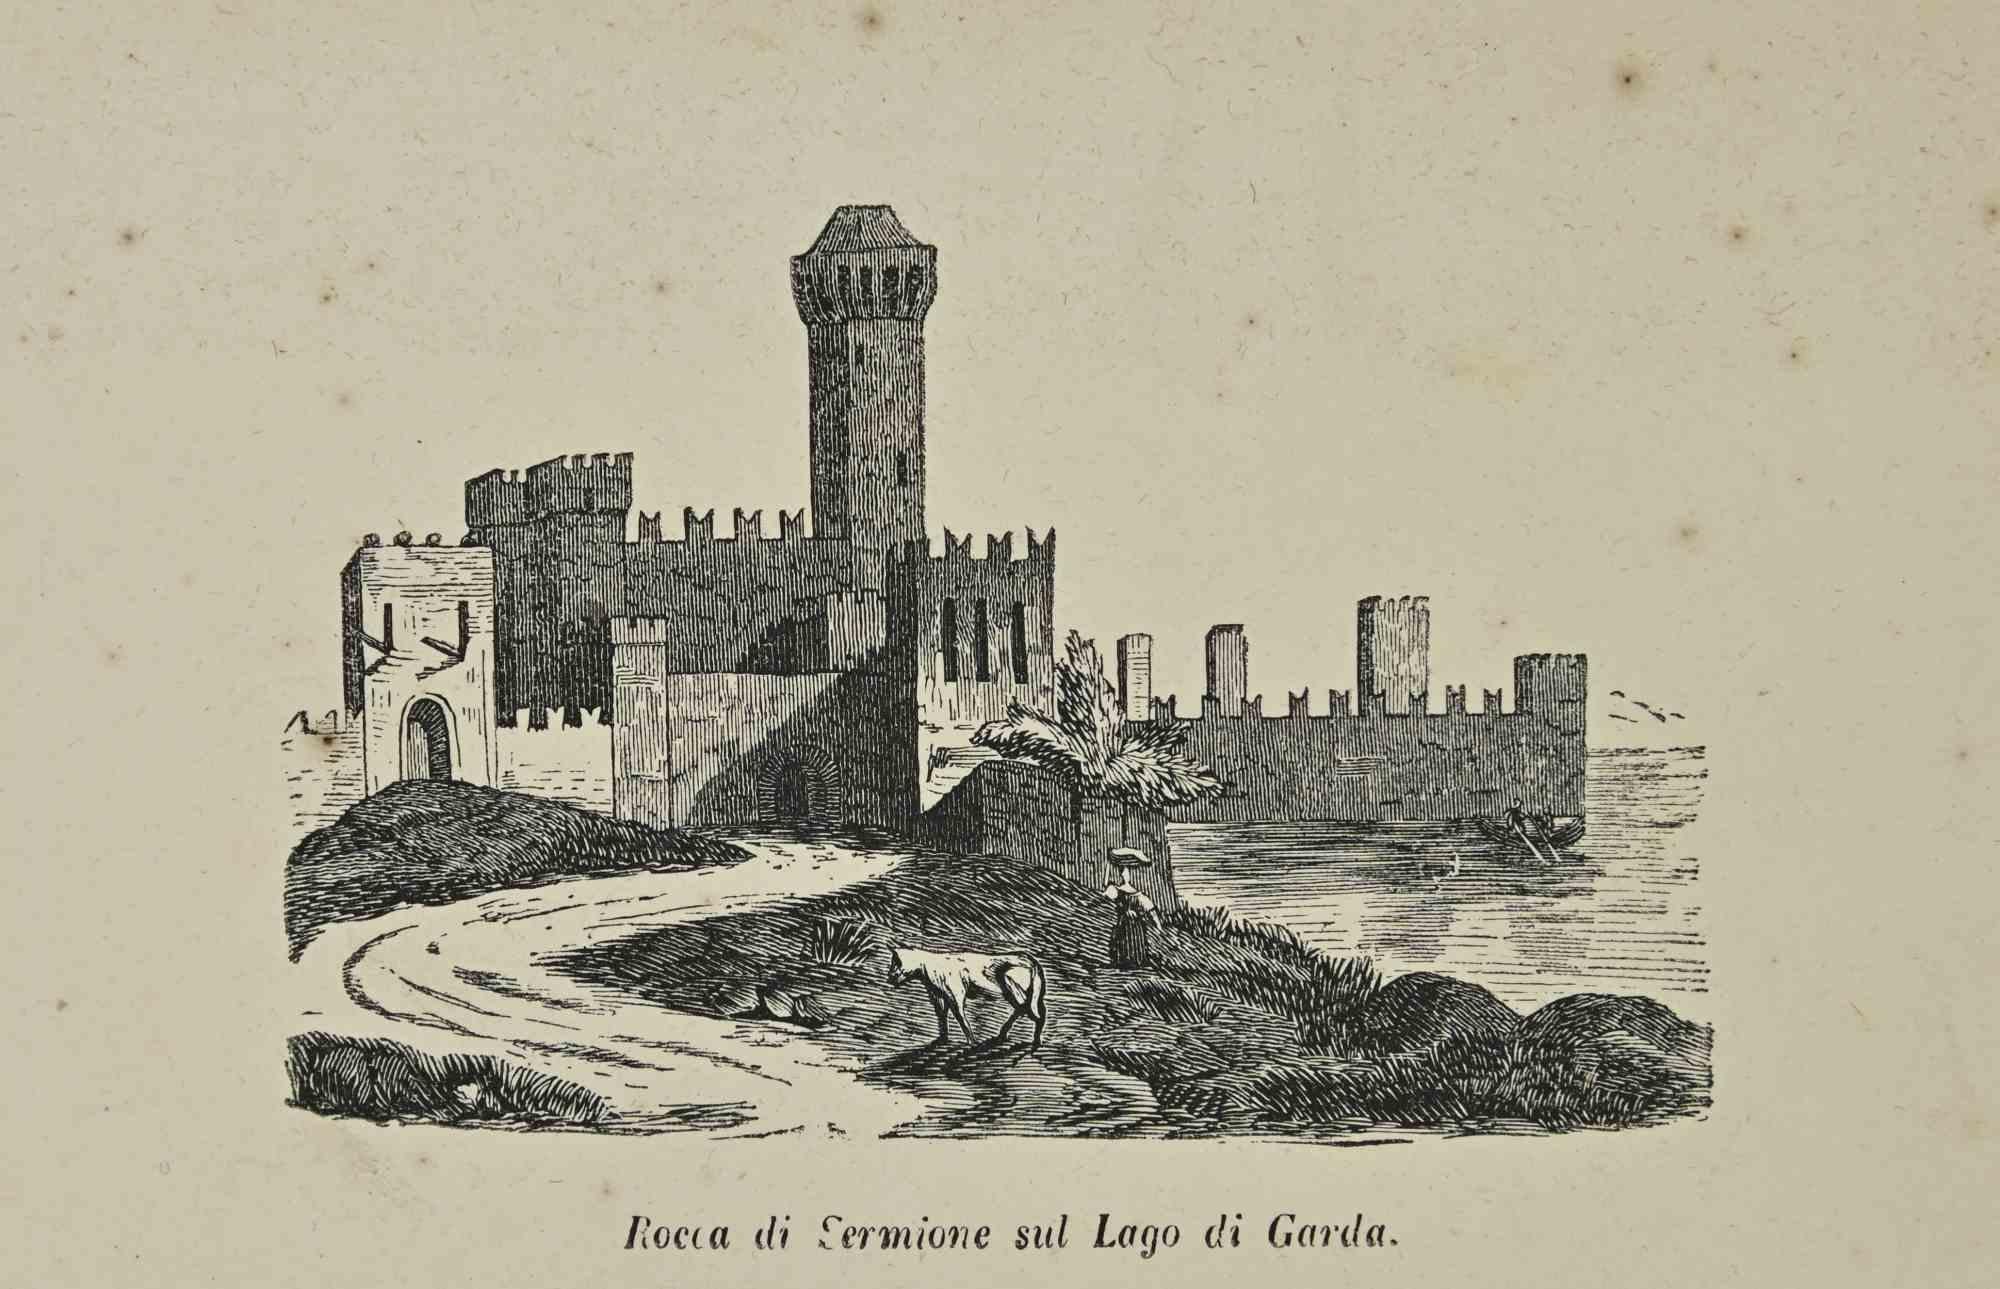 Various Artists Figurative Print - Uses and Customs - Sermione Fortress on Lake Garda - Lithograph - 1862